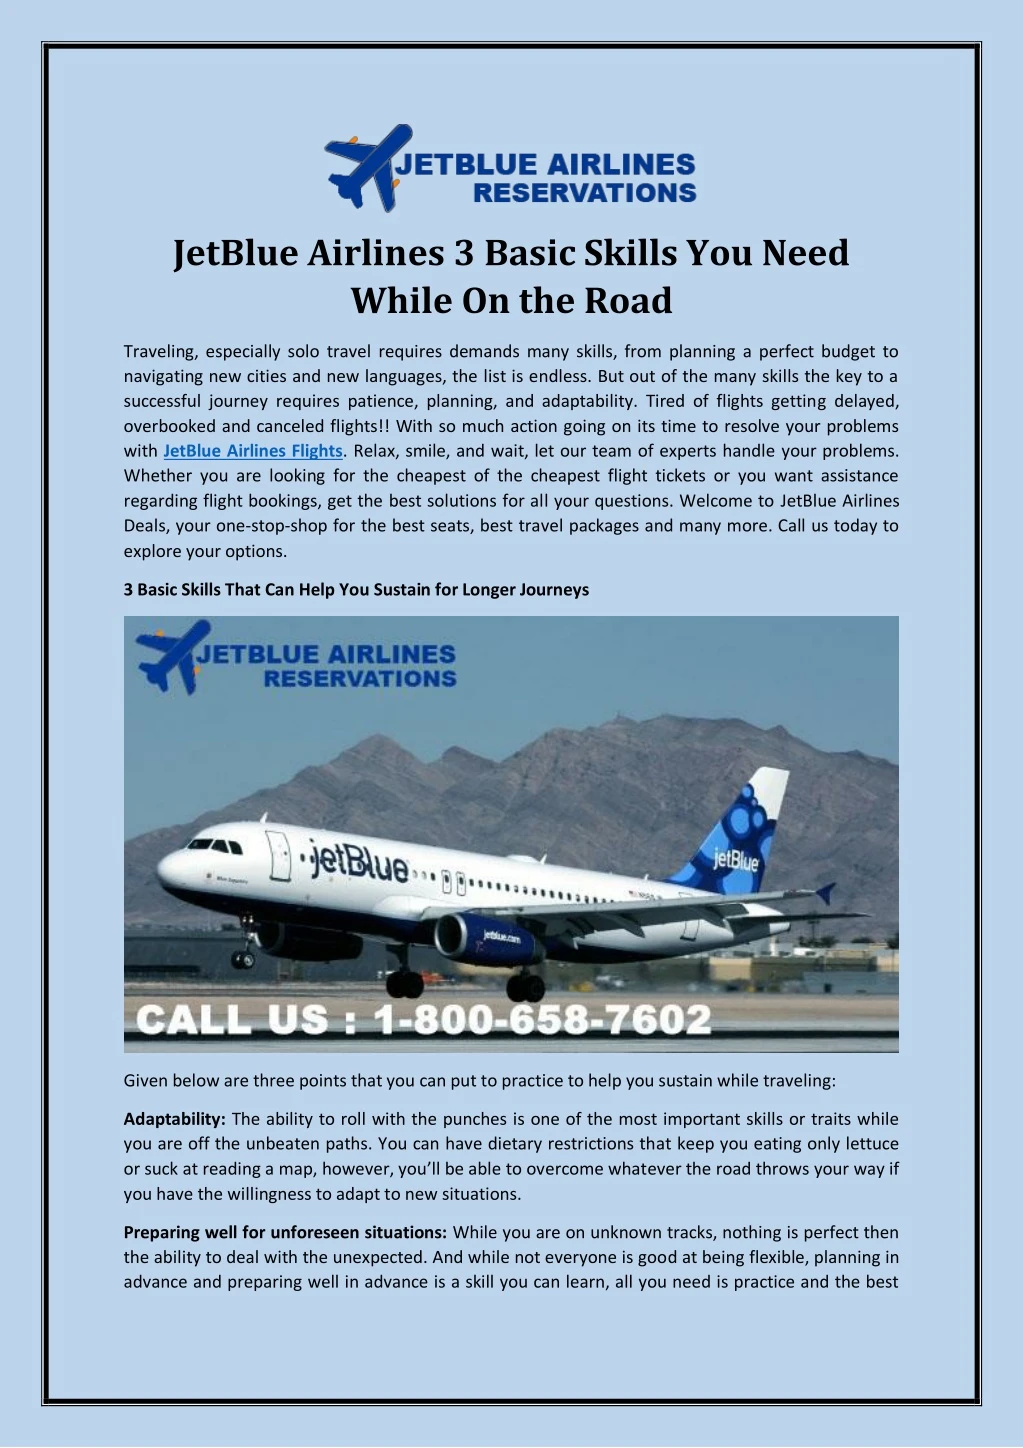 jetblue airlines 3 basic skills you need while